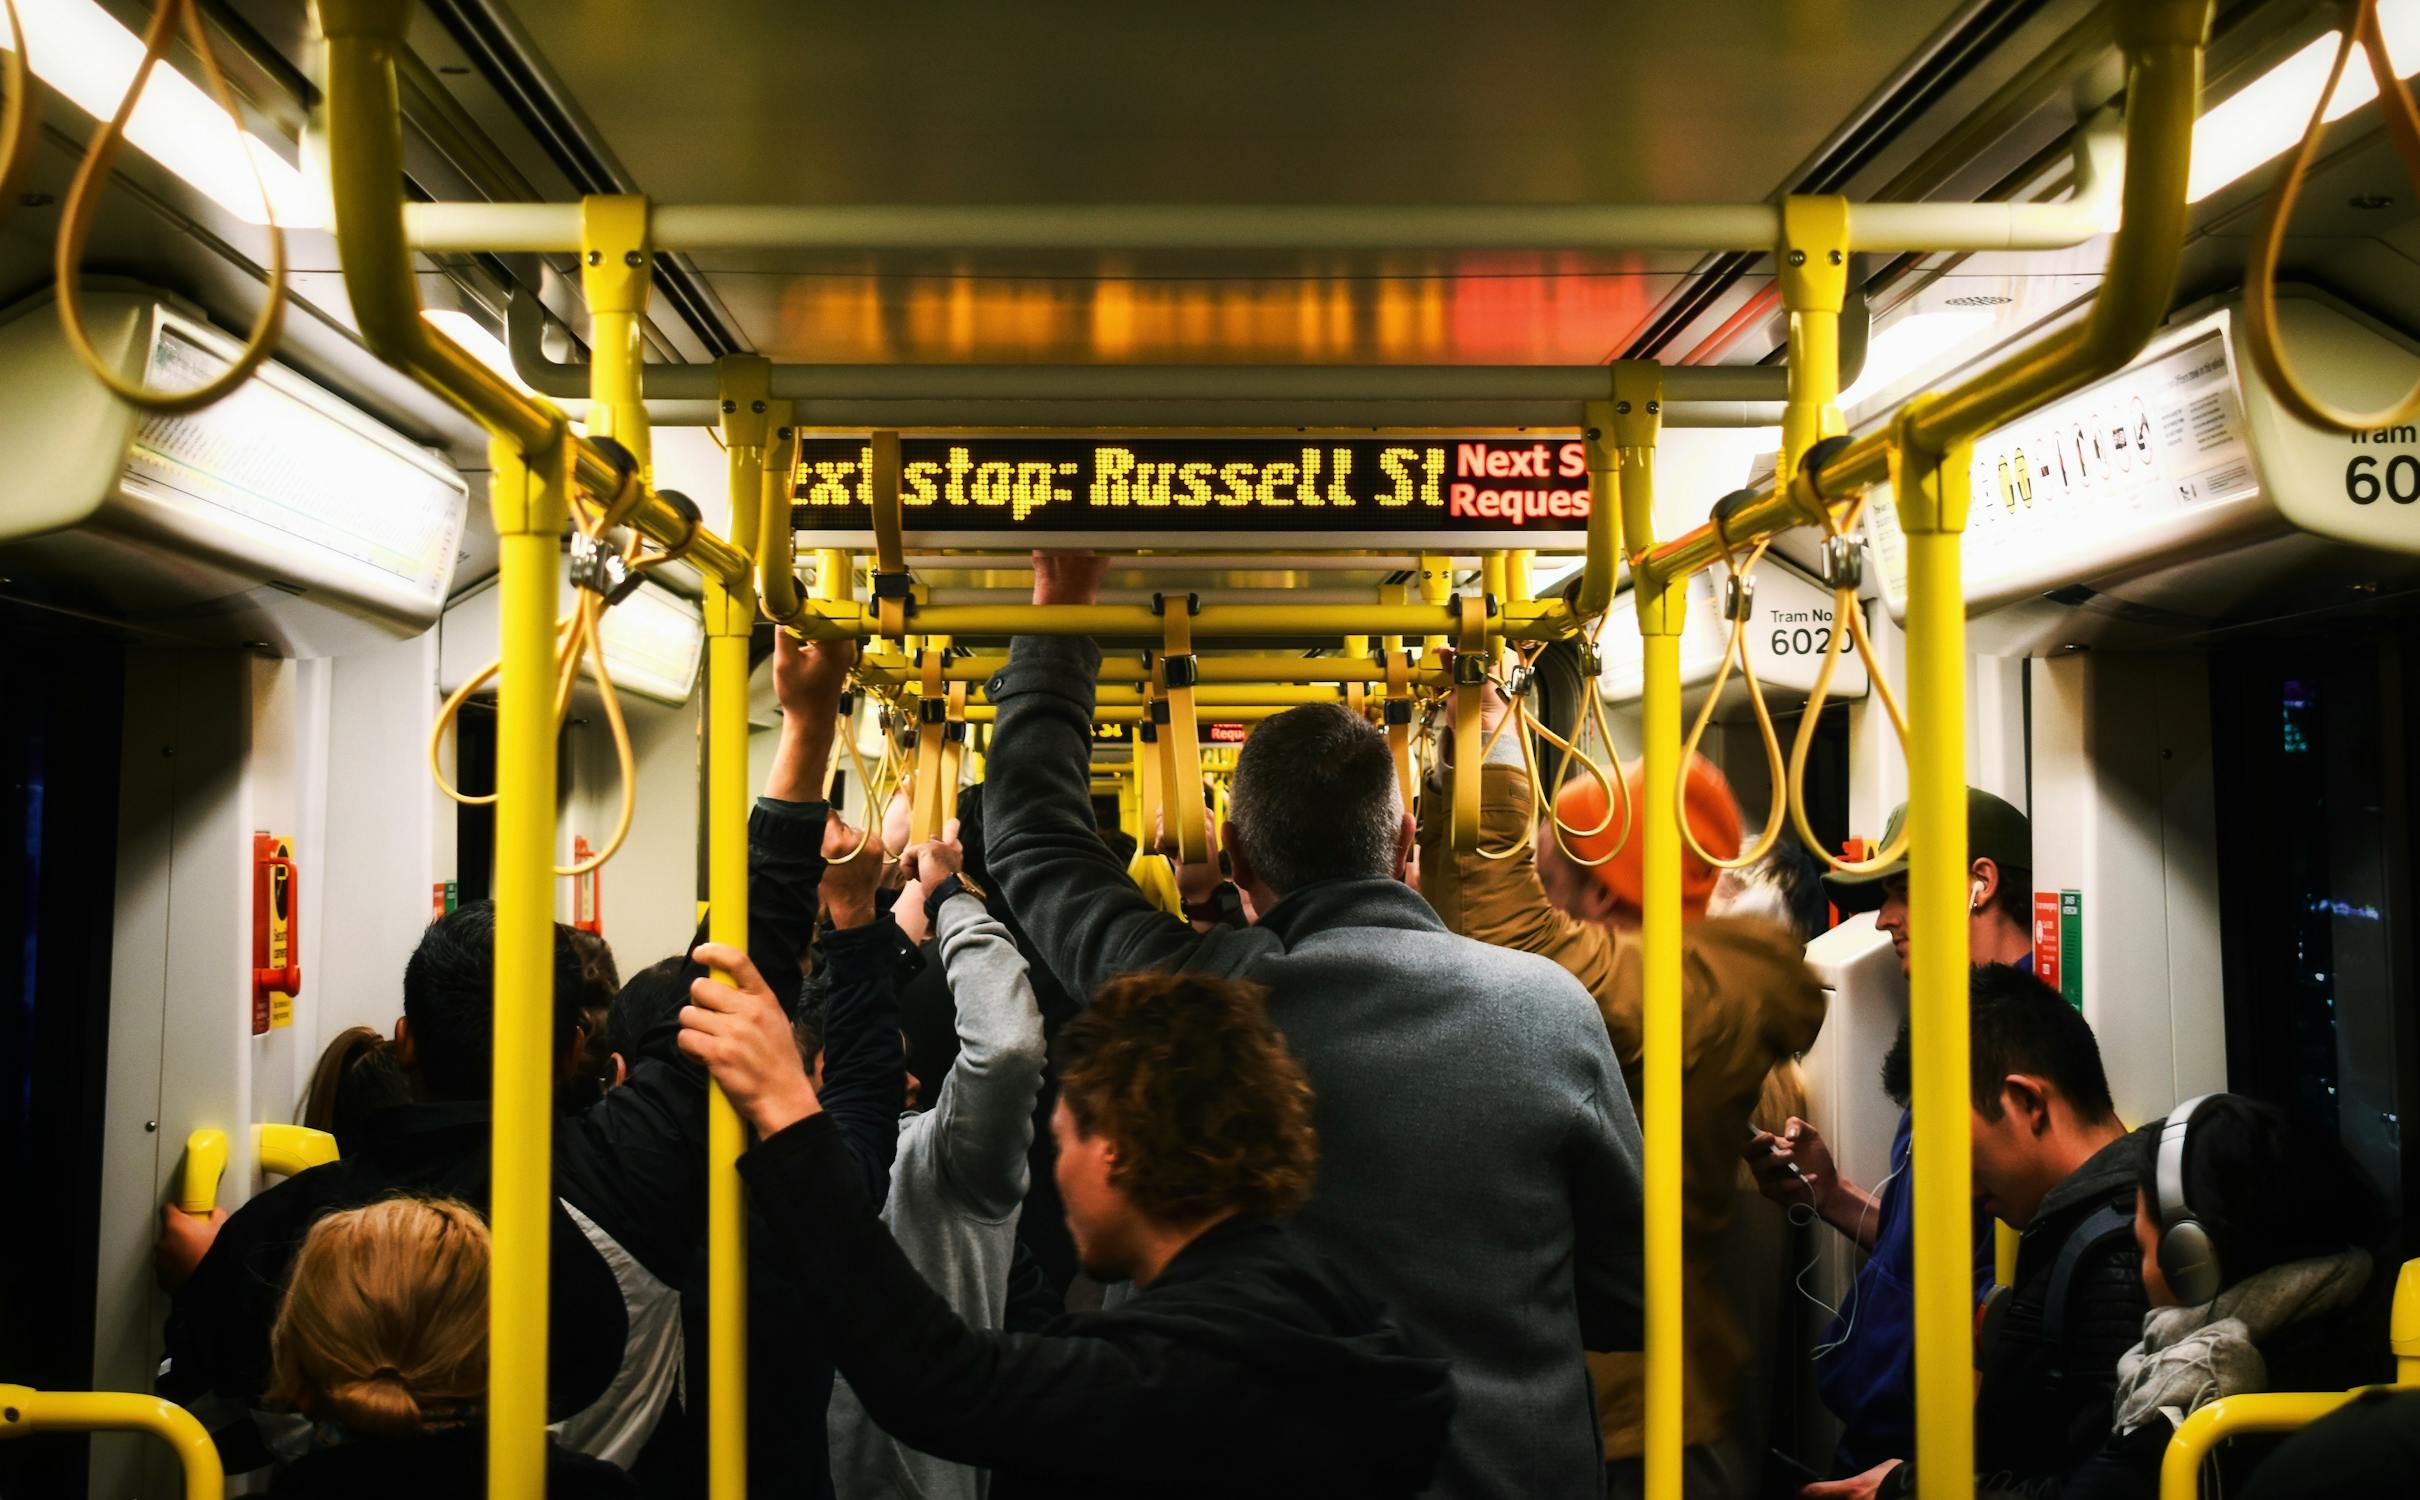 Crowded commute Photo by Rishiraj  Parmar from Pexels: https://www.pexels.com/photo/people-in-train-2706436/